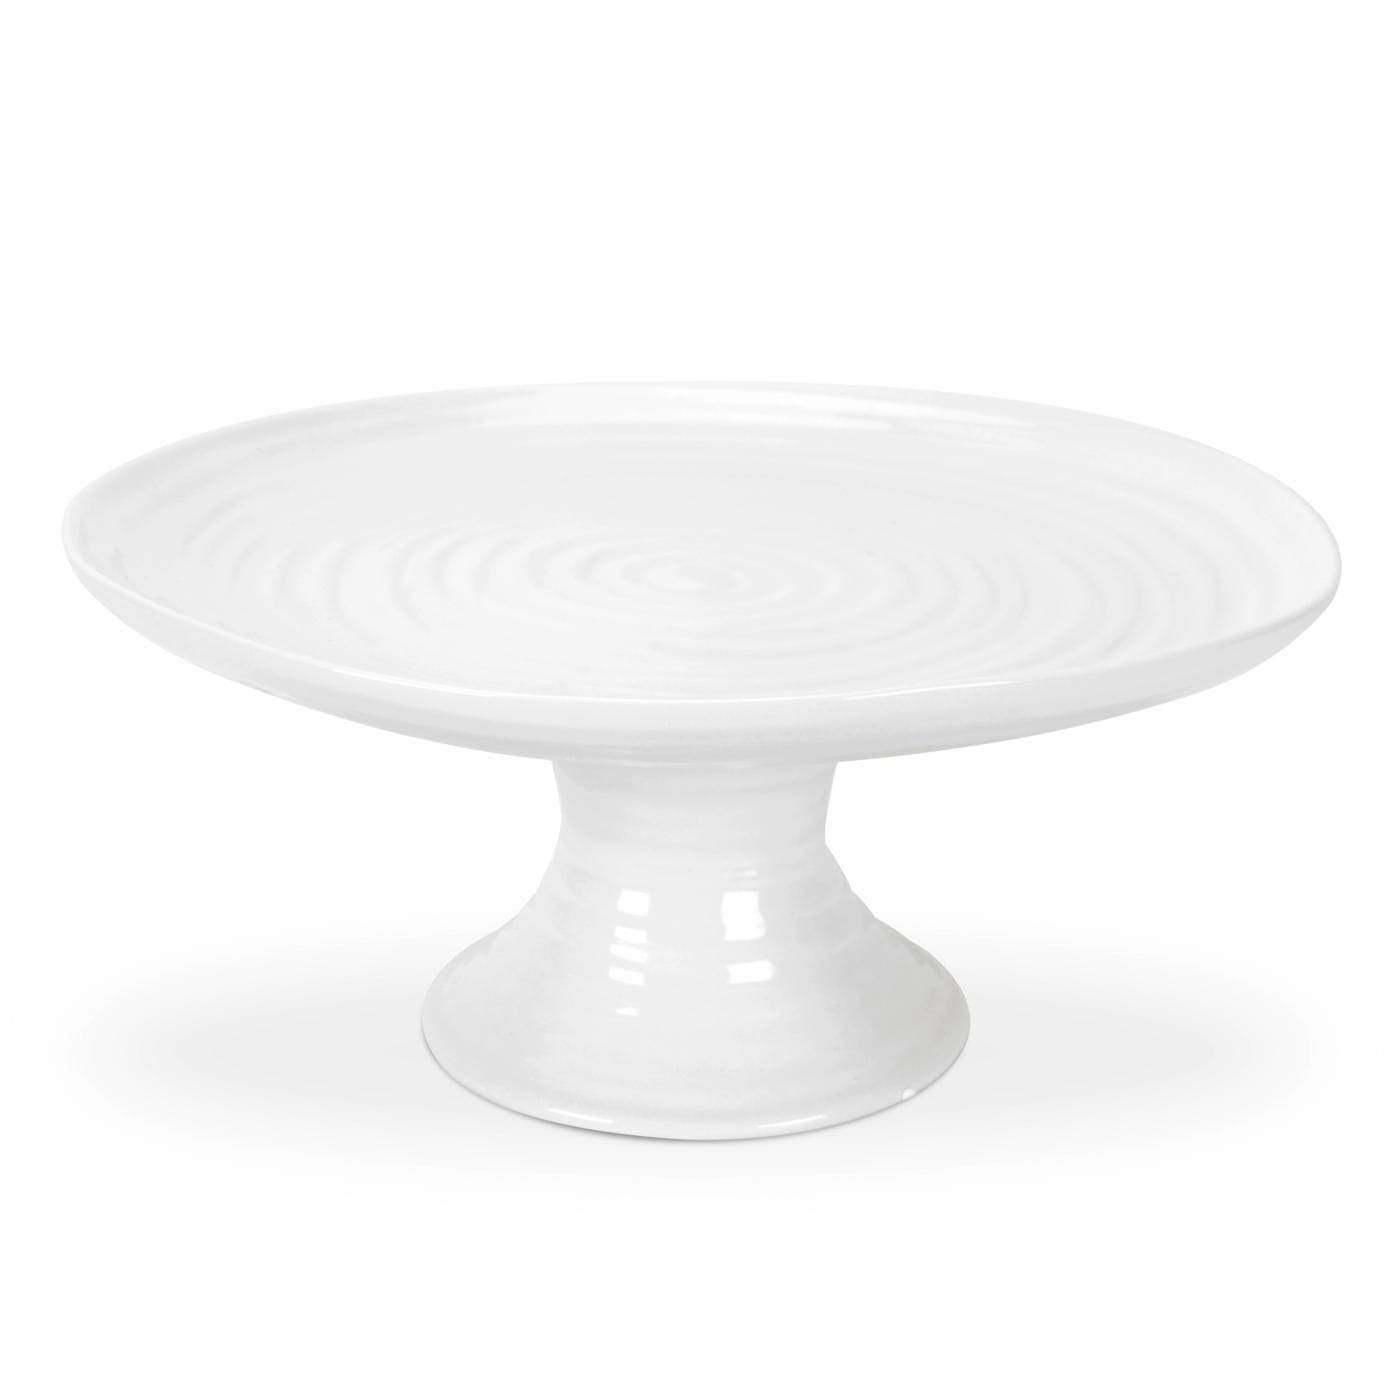 Sophie Conran for Portmeirion White Small Footed Cake Plate